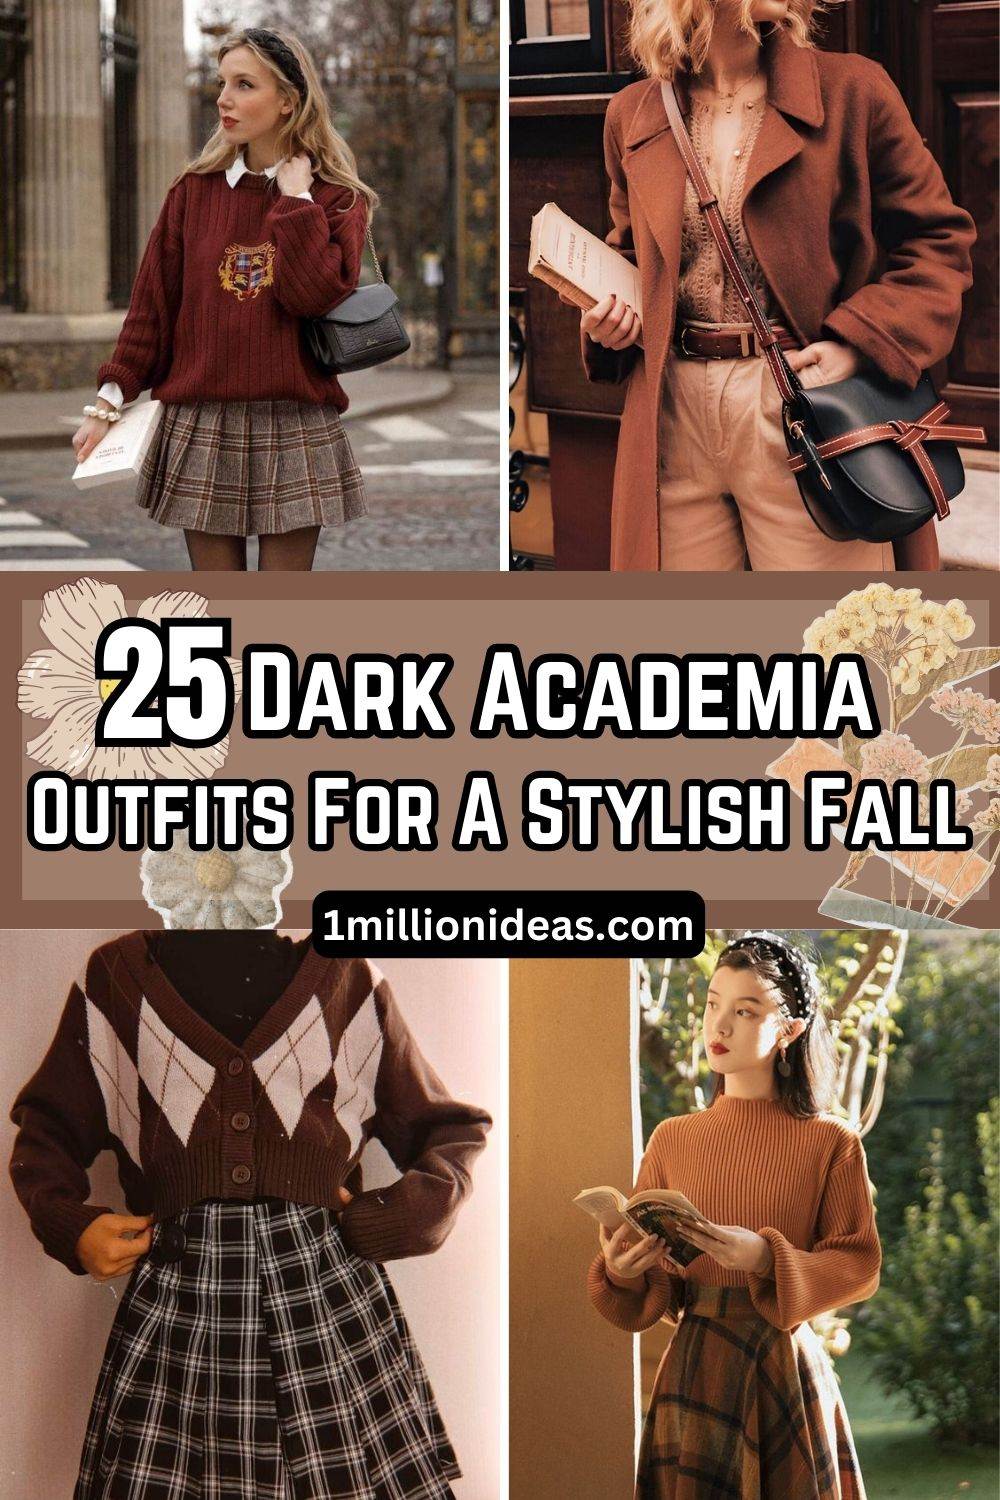 Be A Model: 25 Dark Academia Outfits For A Stylish Fall - 161